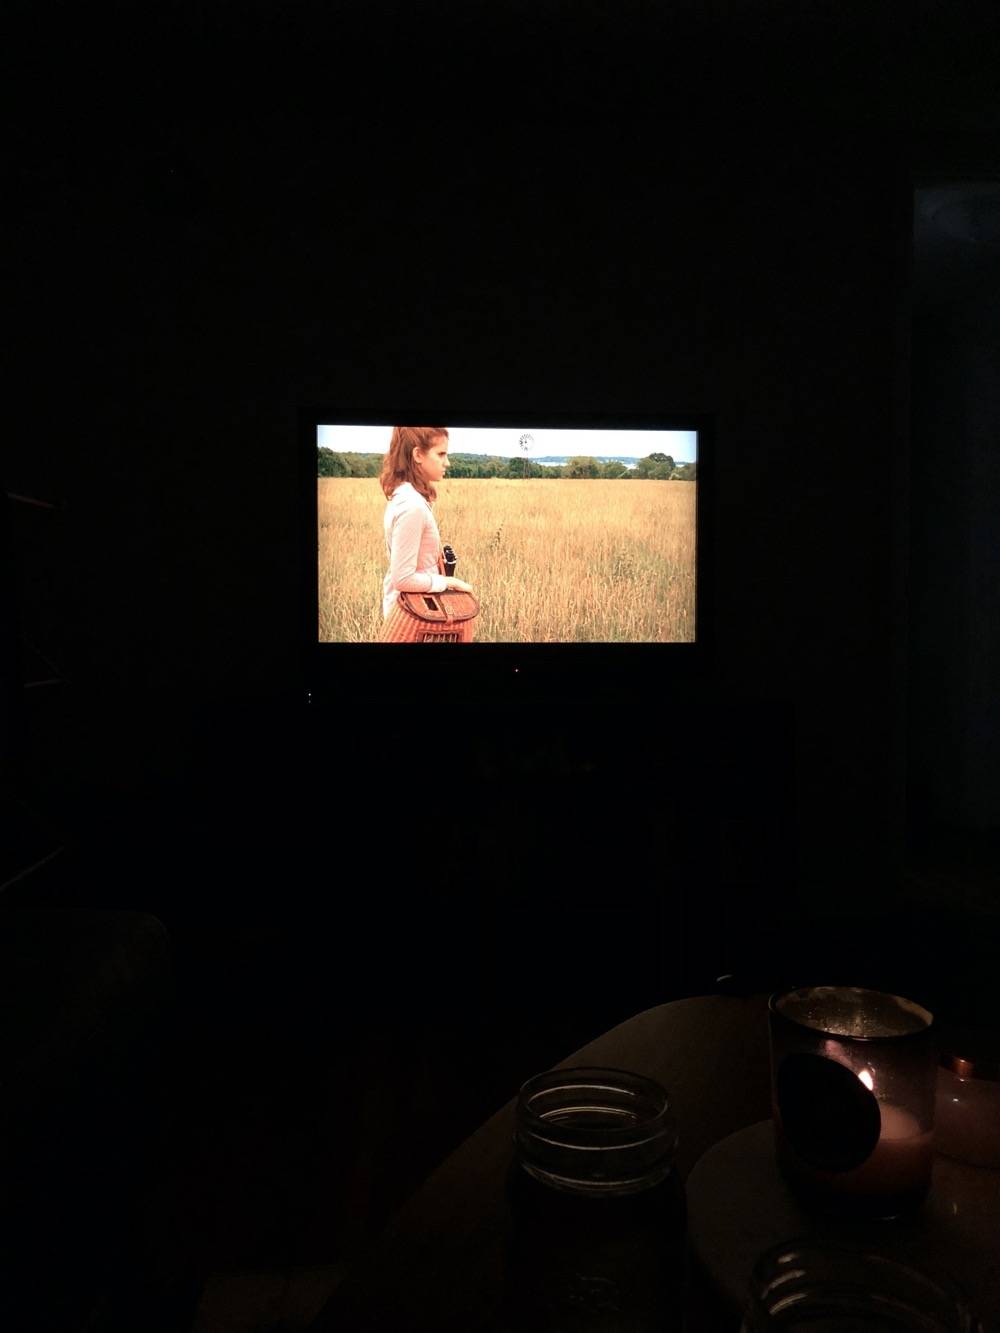 IMAGE: Photo of a distant television screen, featuring a girl standing in a field. There's a candle lit in the foreground of the photo, in a dark room. Photo by Patrick Singer.